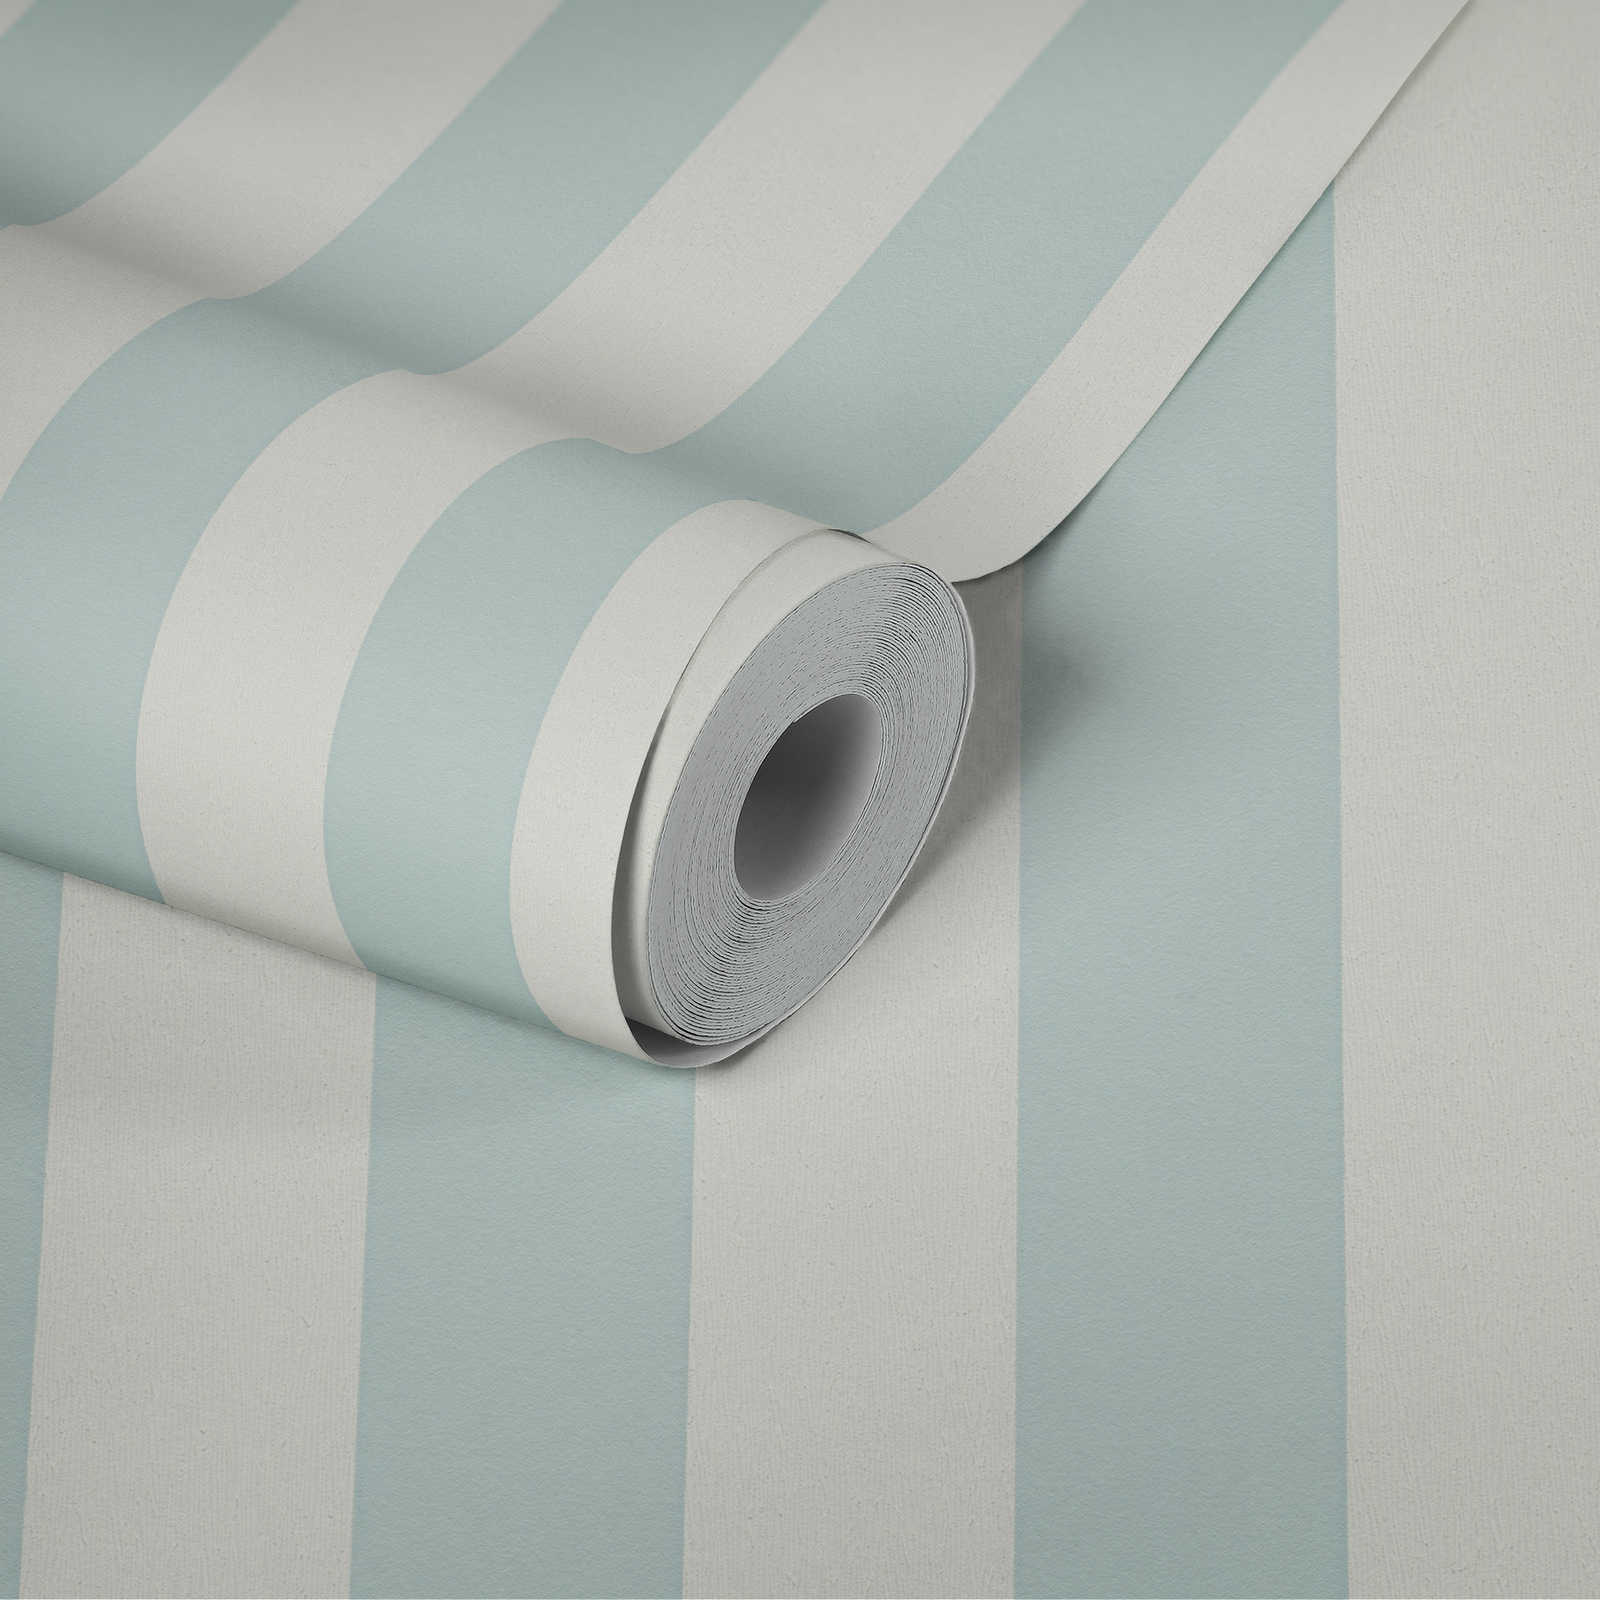             Stripes wallpaper with textured pattern, block stripes blue & white
        